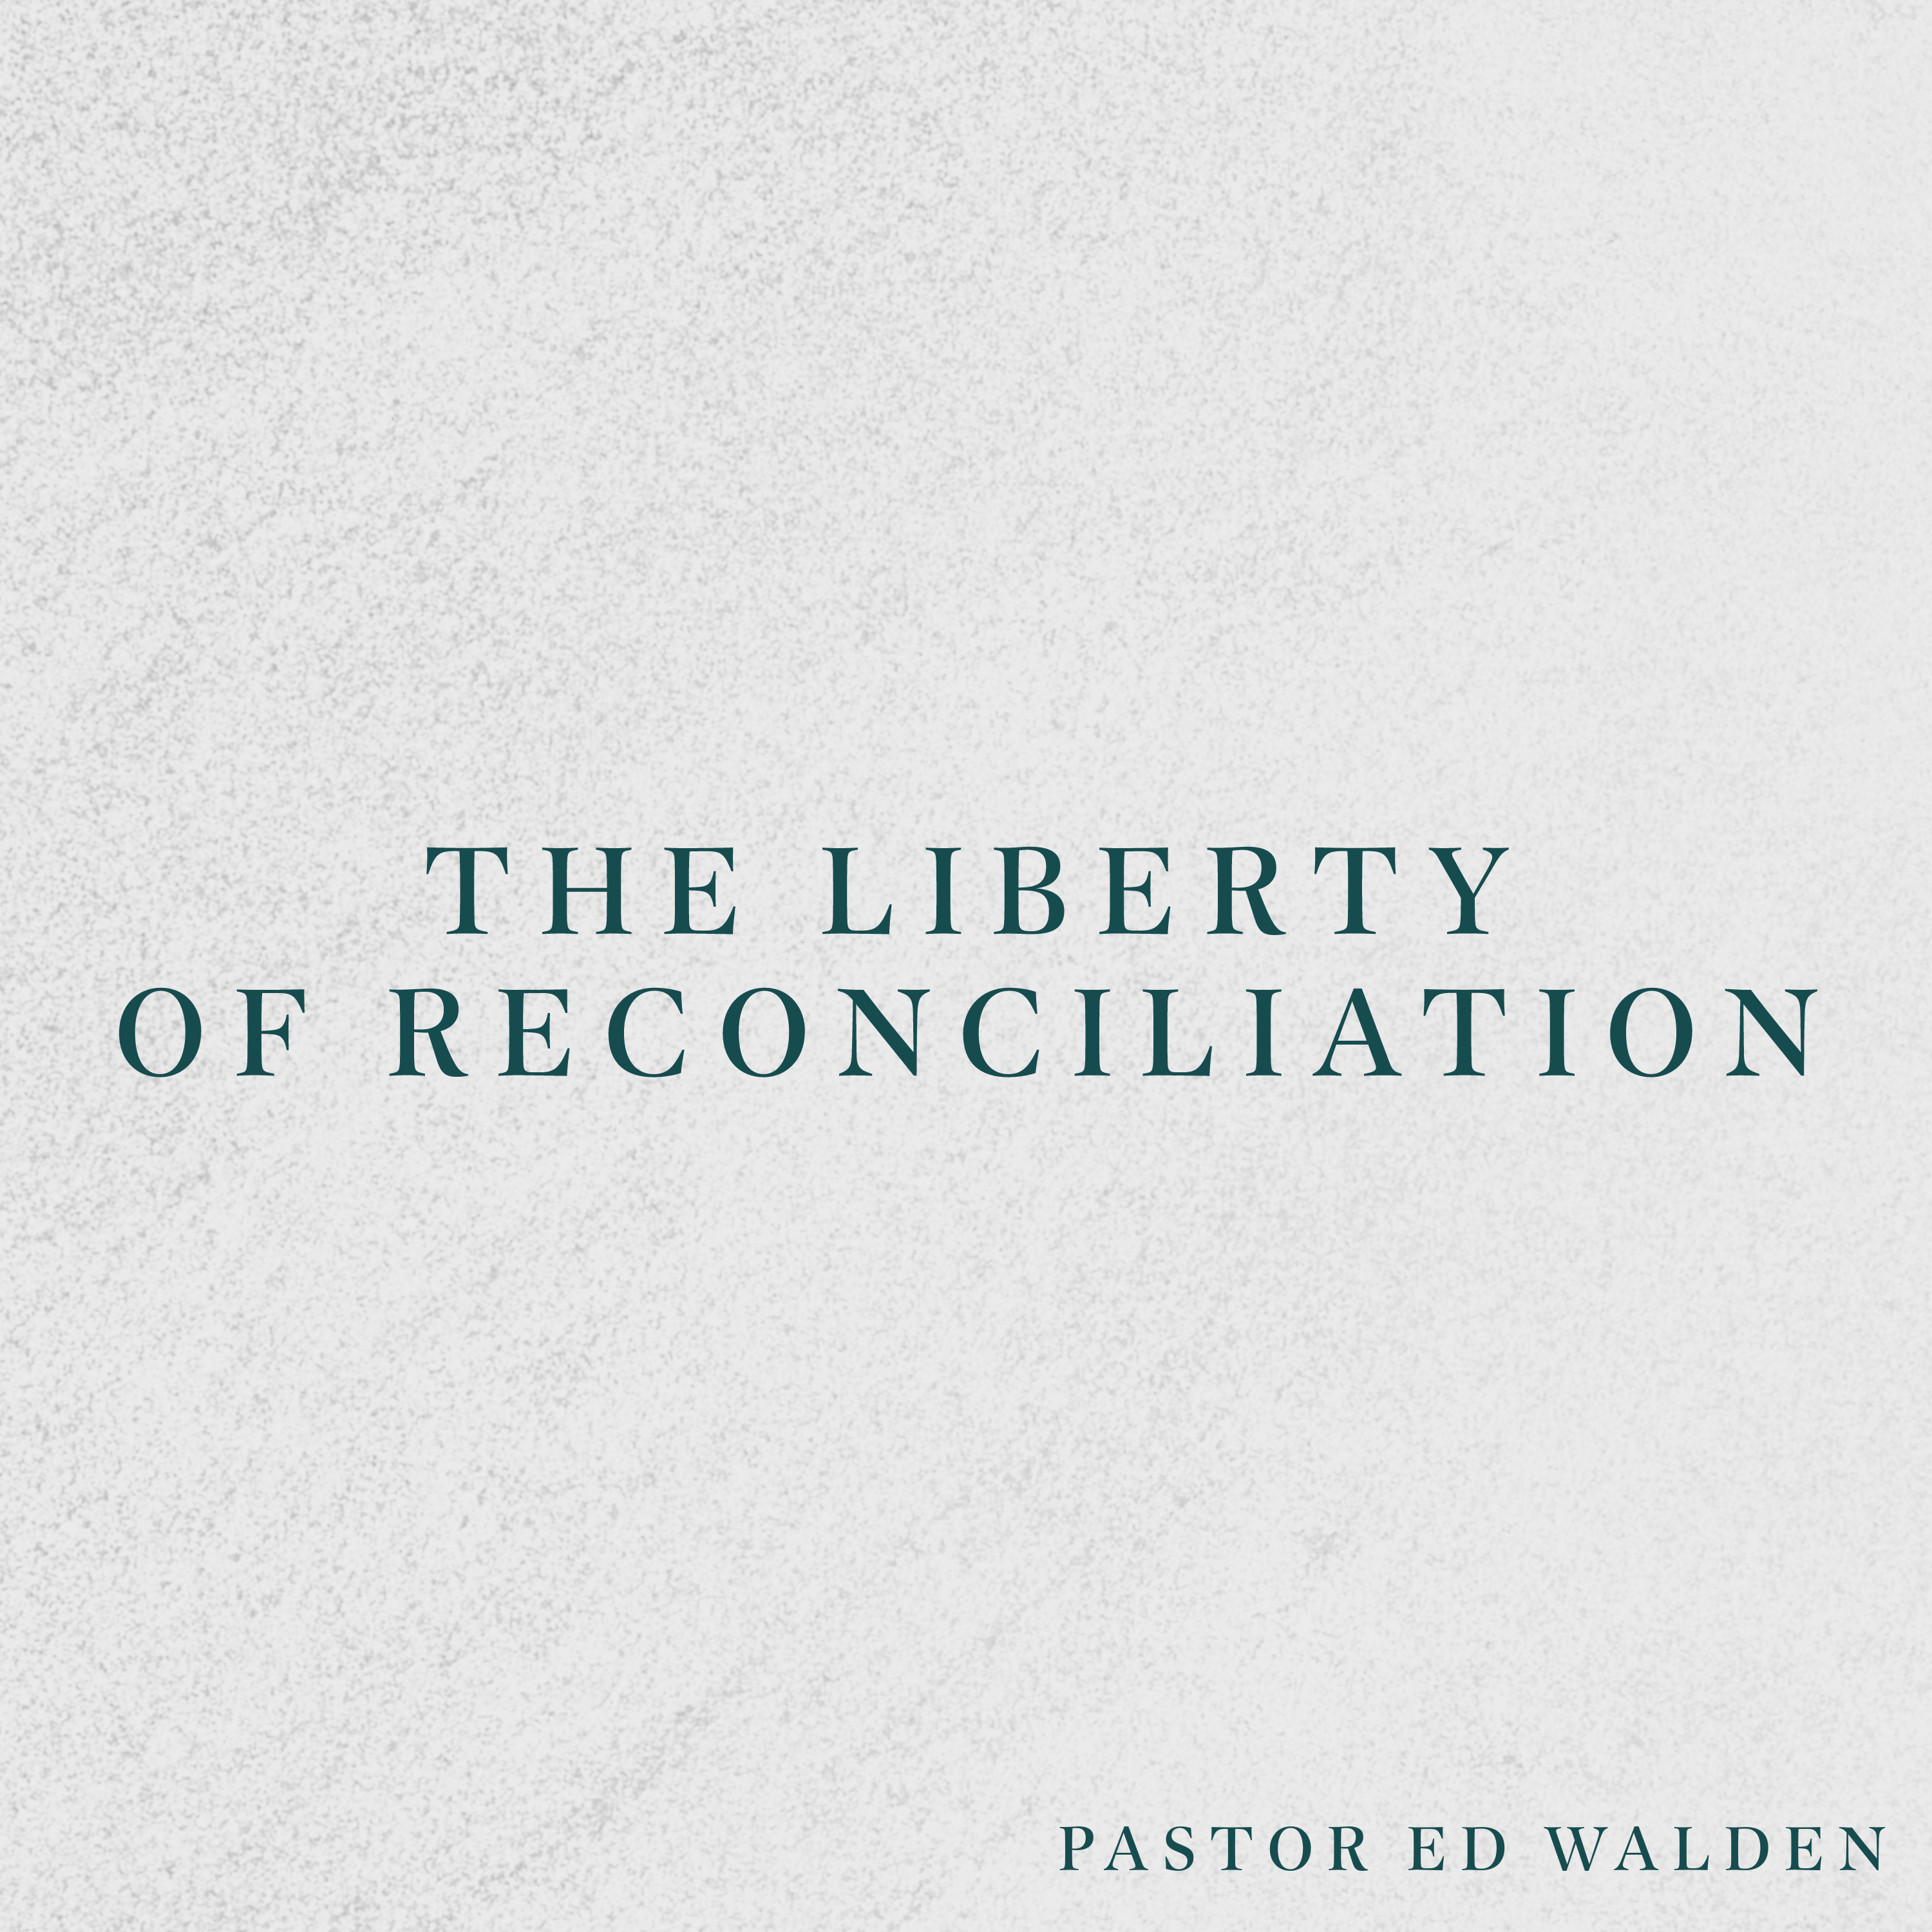 The Liberty of Reconciliation